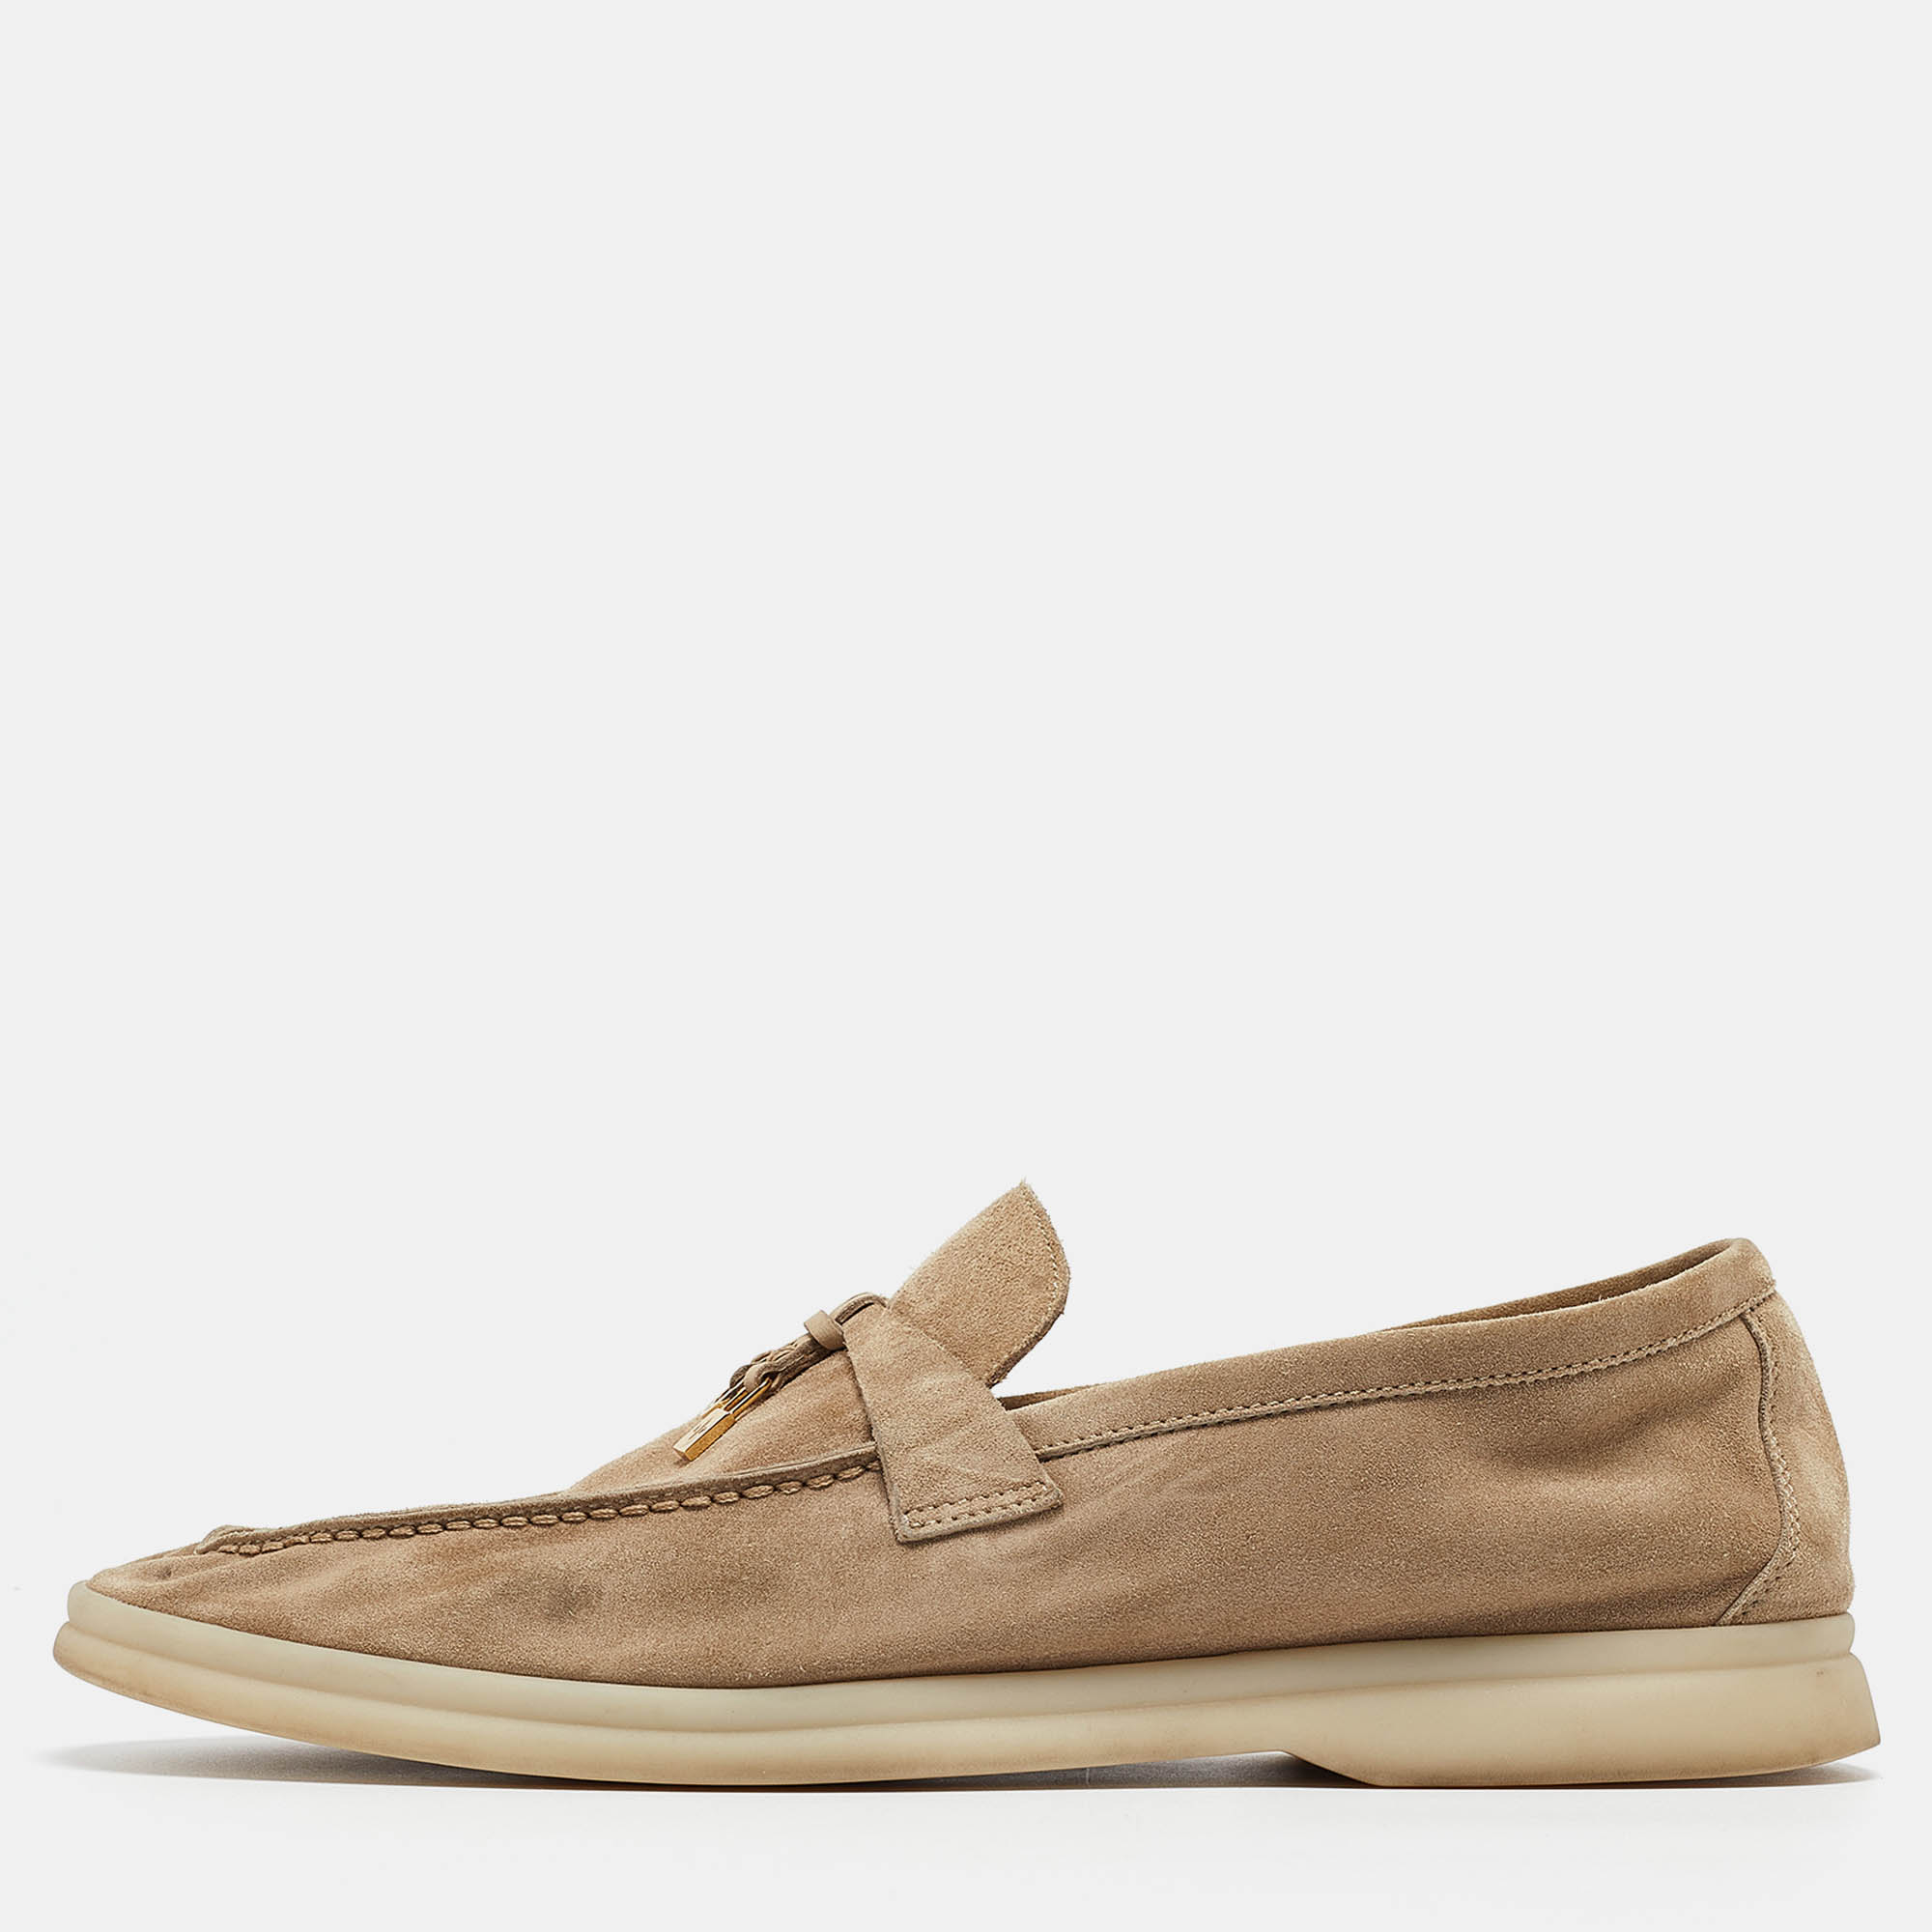 Suede Summer Charms Walk Loafers